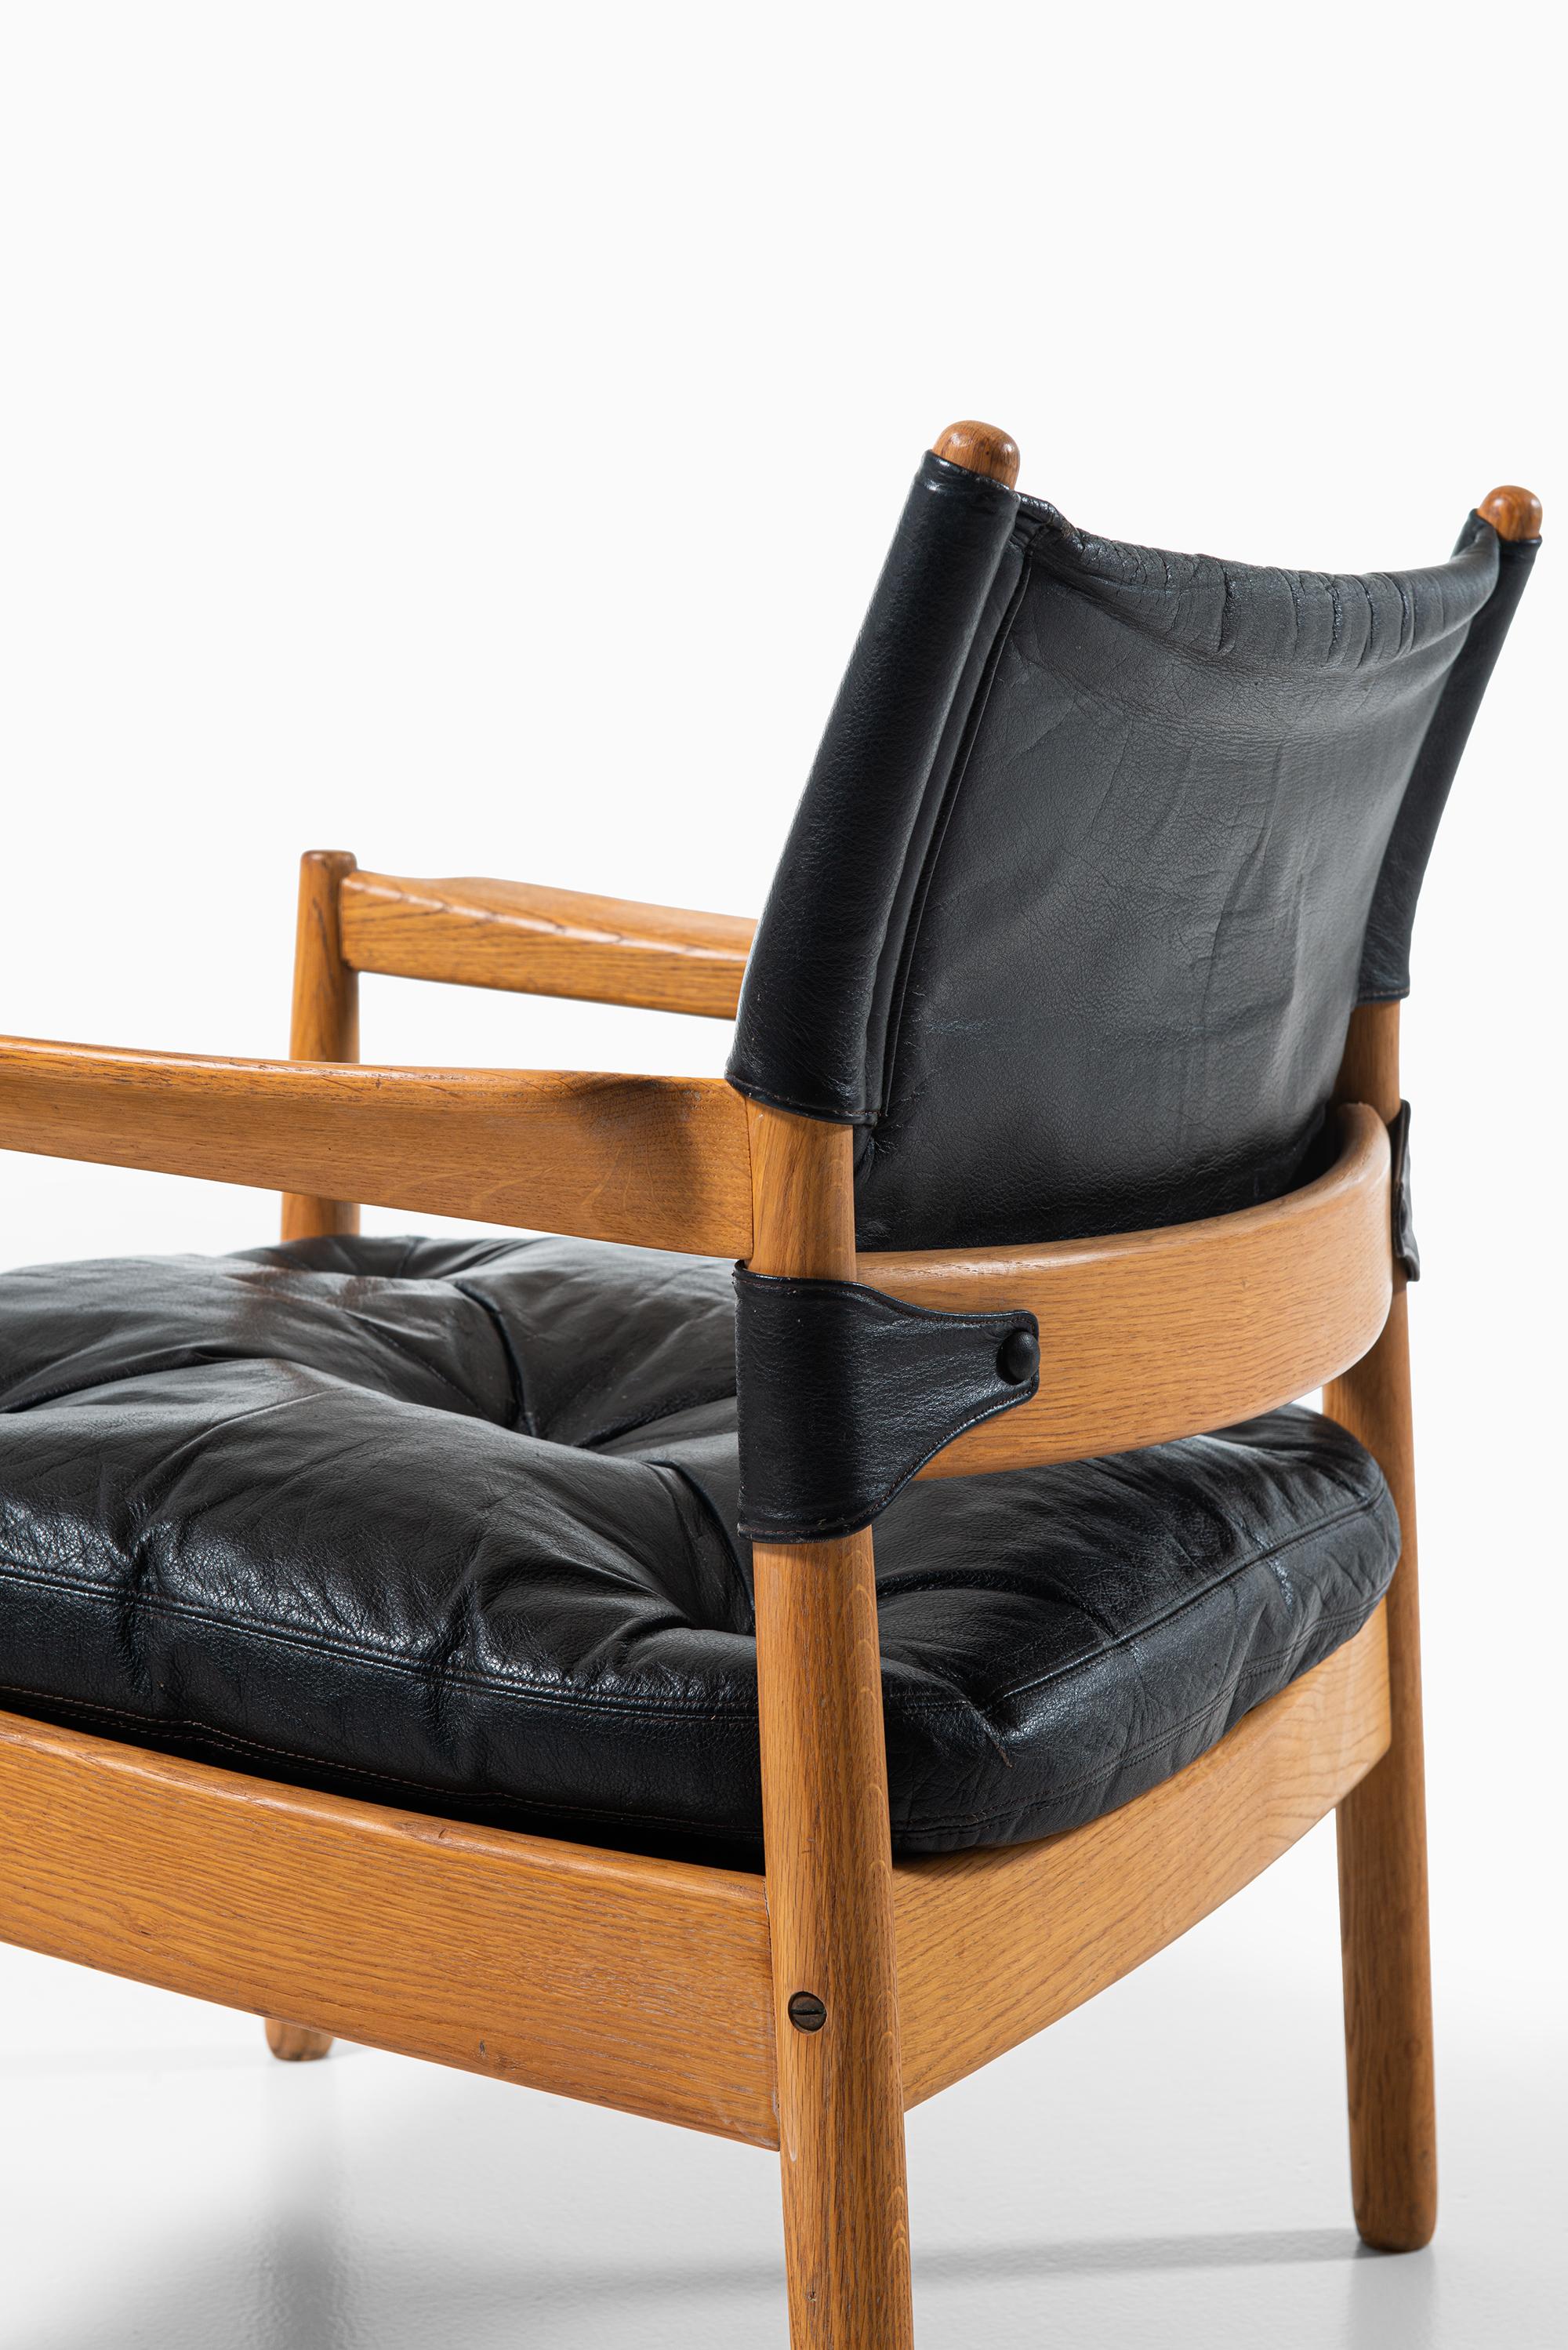 Leather Gunnar Myrstrand Easy Chairs Produced by Källemo in Sweden